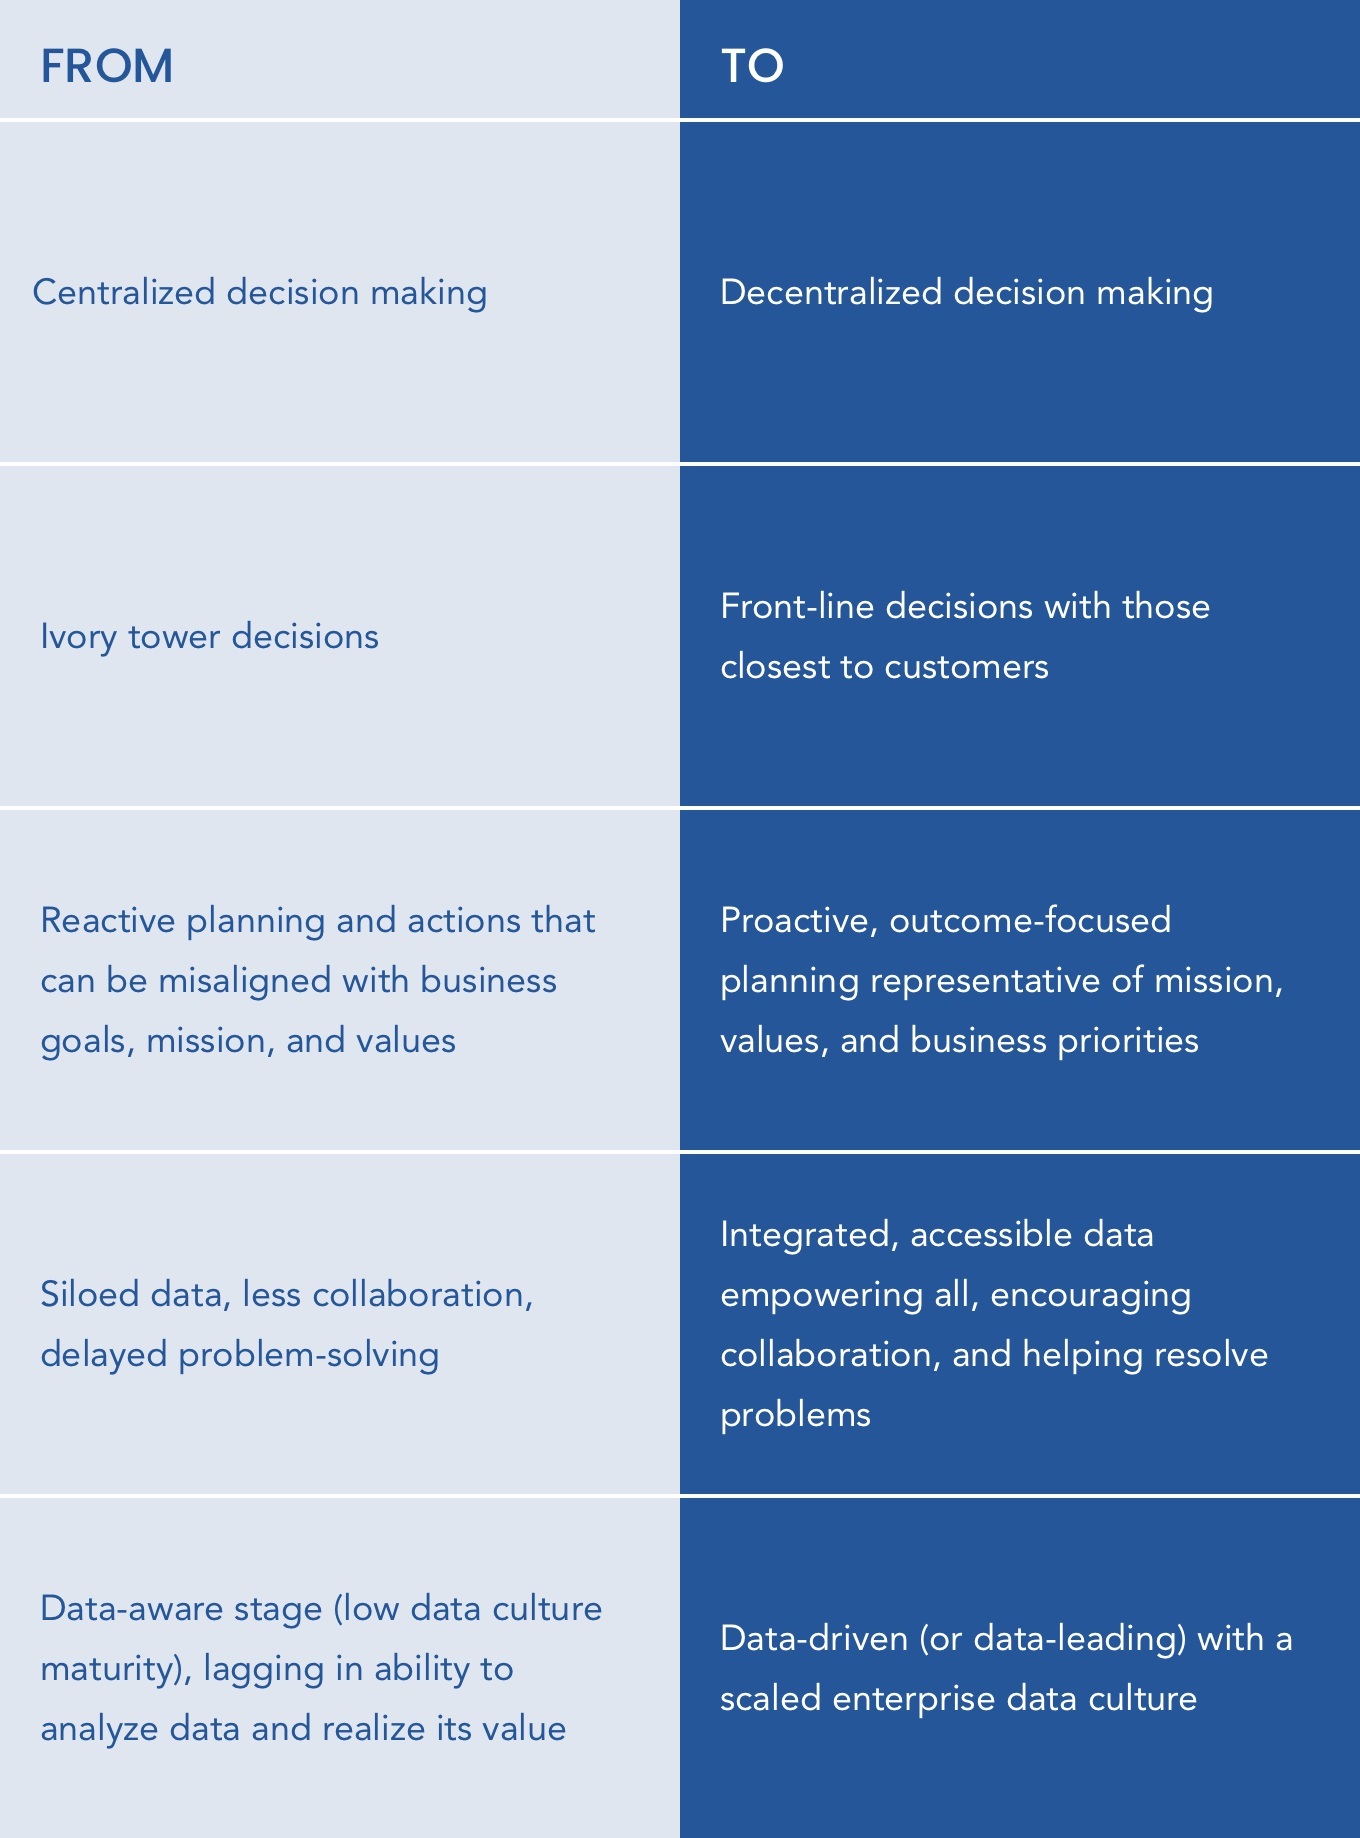 A table that represents in the left-hand column how decisions were made and companies operated before becoming data-driven. The right-side column reflects changes after increasing data access and use to have a data-driven culture. 